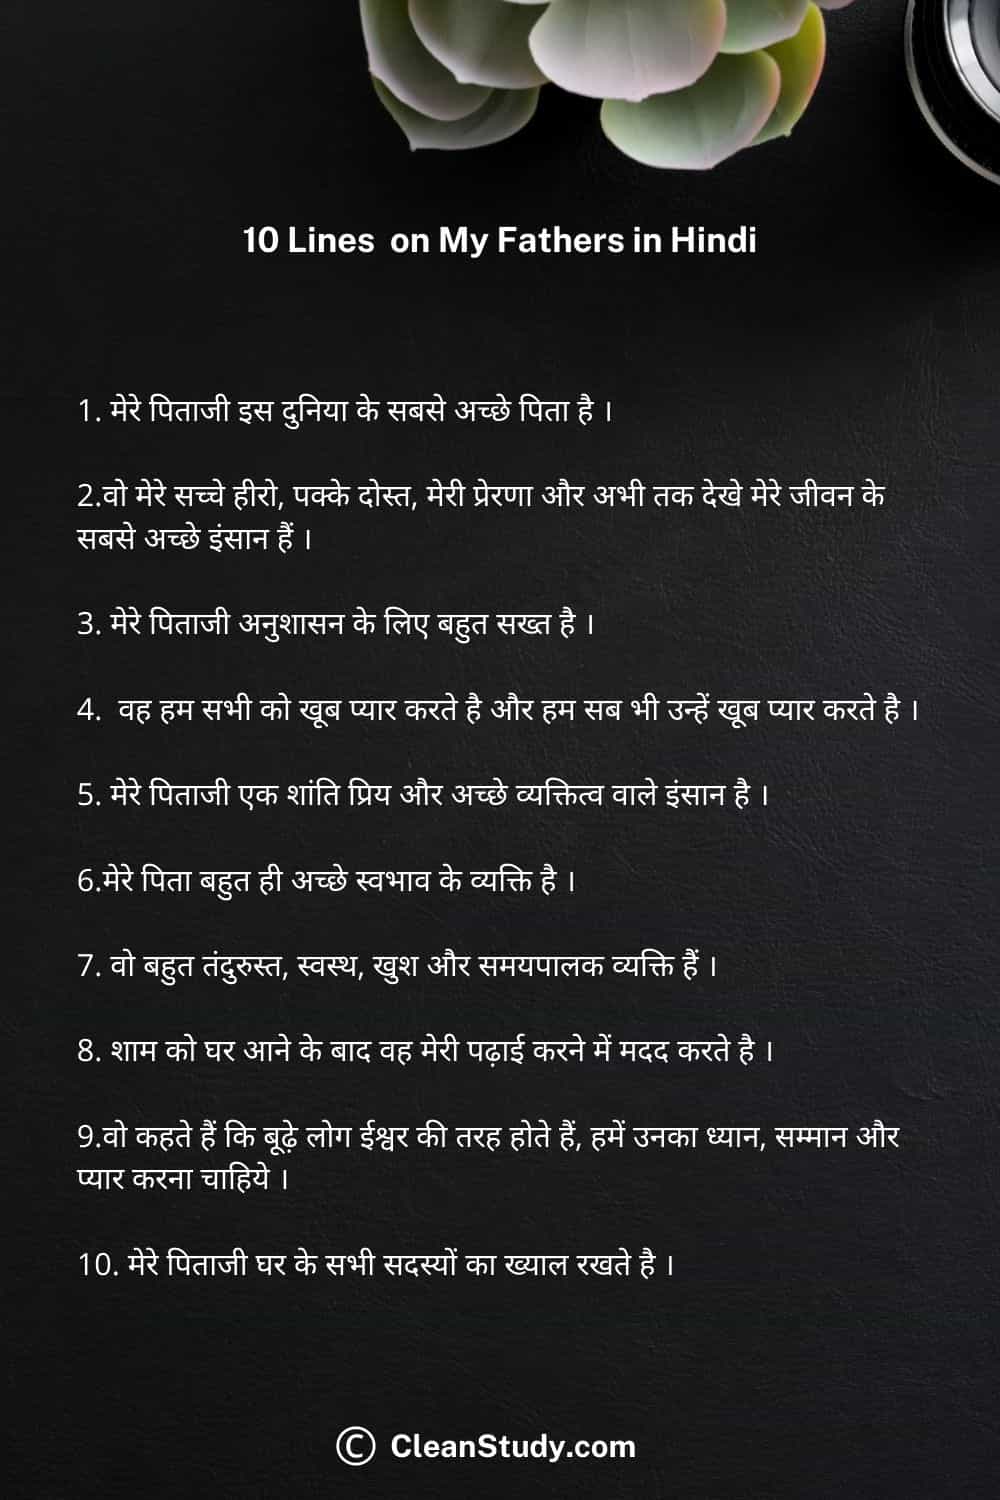 10 lines on my father in hindi